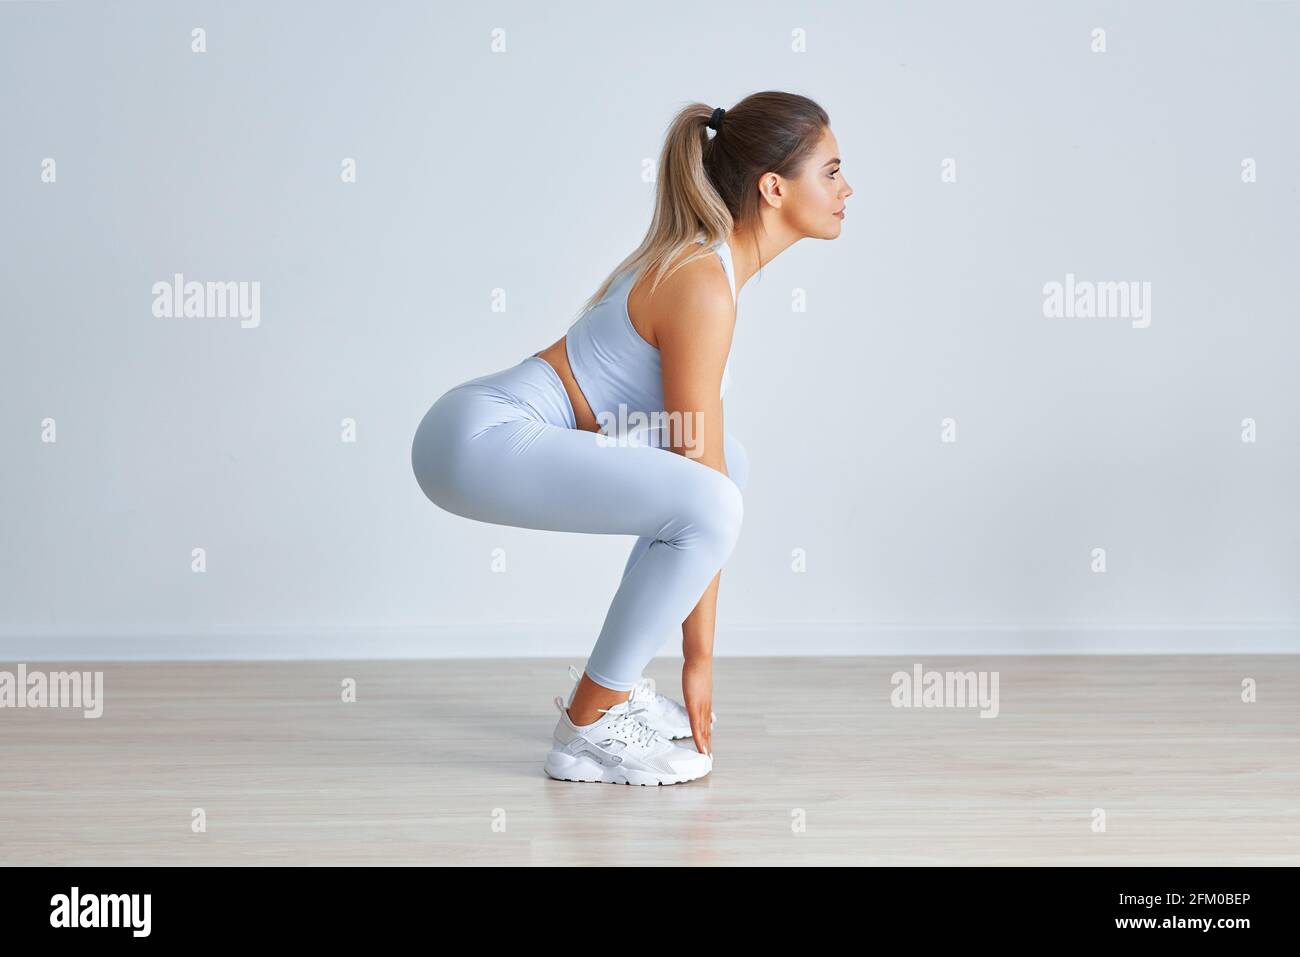 Adult beautiful woman working out over light background Stock Photo